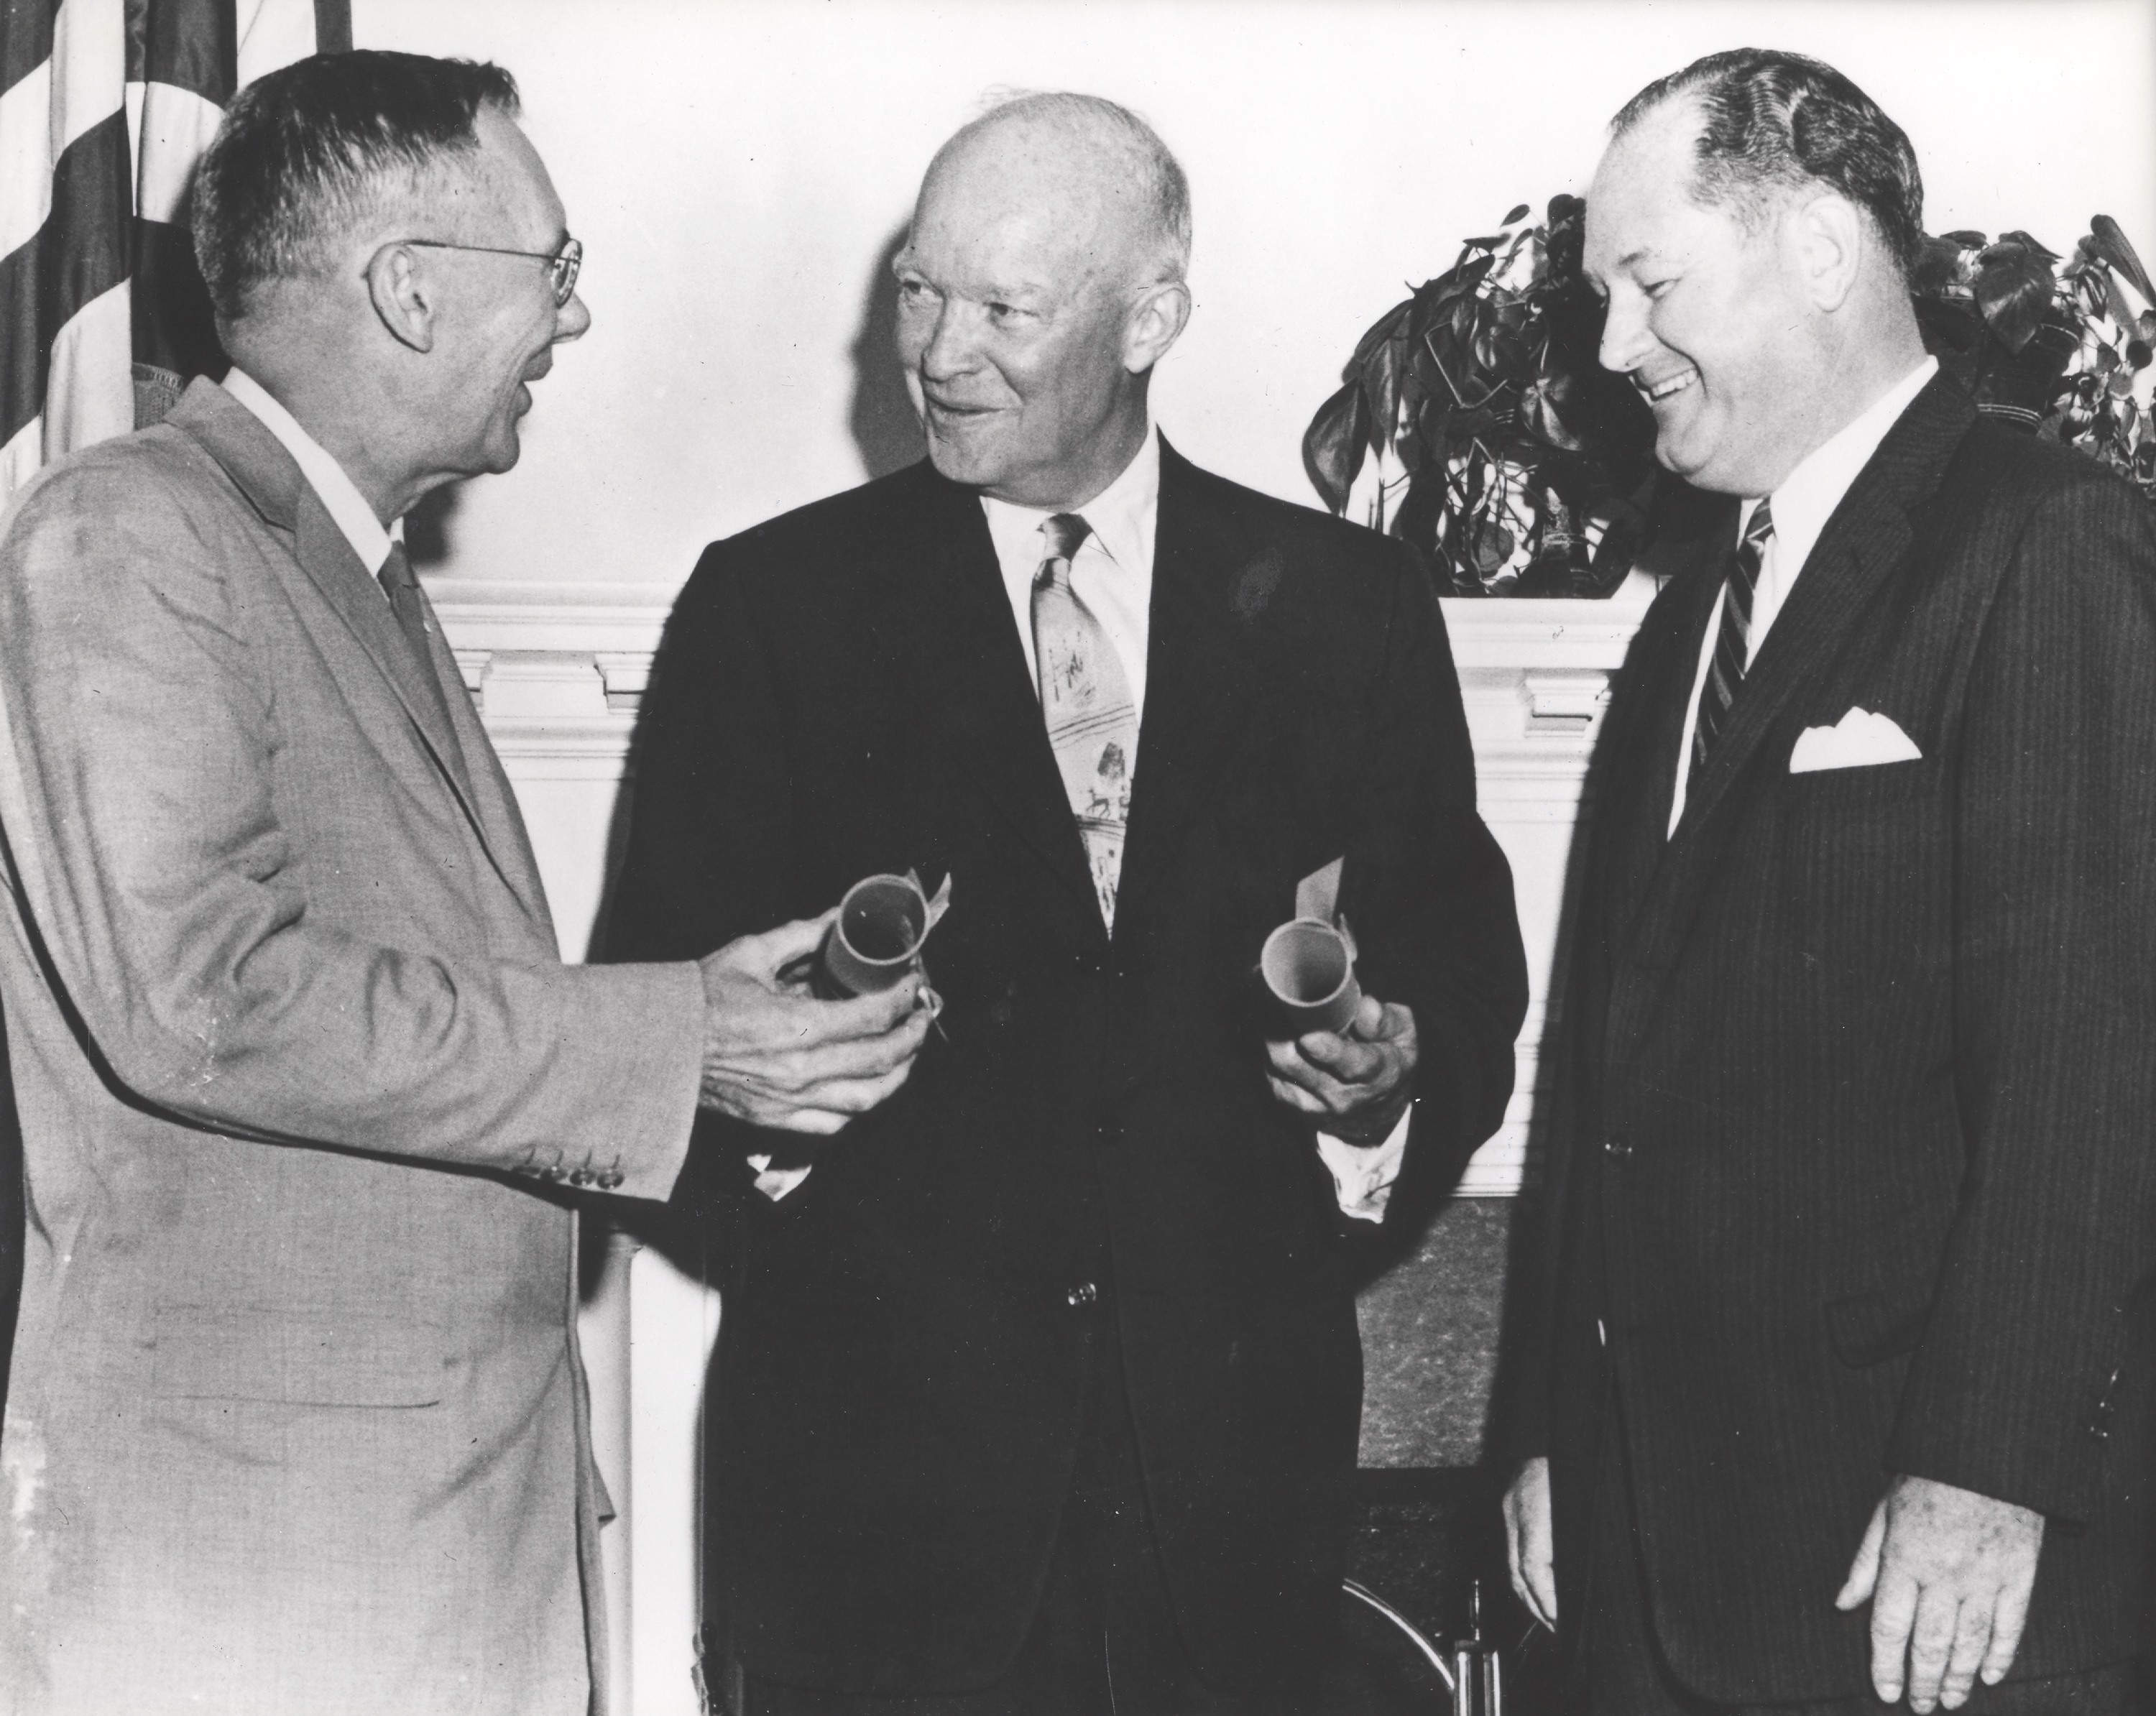 From left to right, Dr. Hugh L. Dryden, President Dwight D. Eisenhower, and Dr. T. Keith Glennan smile as they have a discussion. Dryden and Eisenhower hold cylindrical objects in their hands; Glennan looks down at their hands. They are all wearing suits.